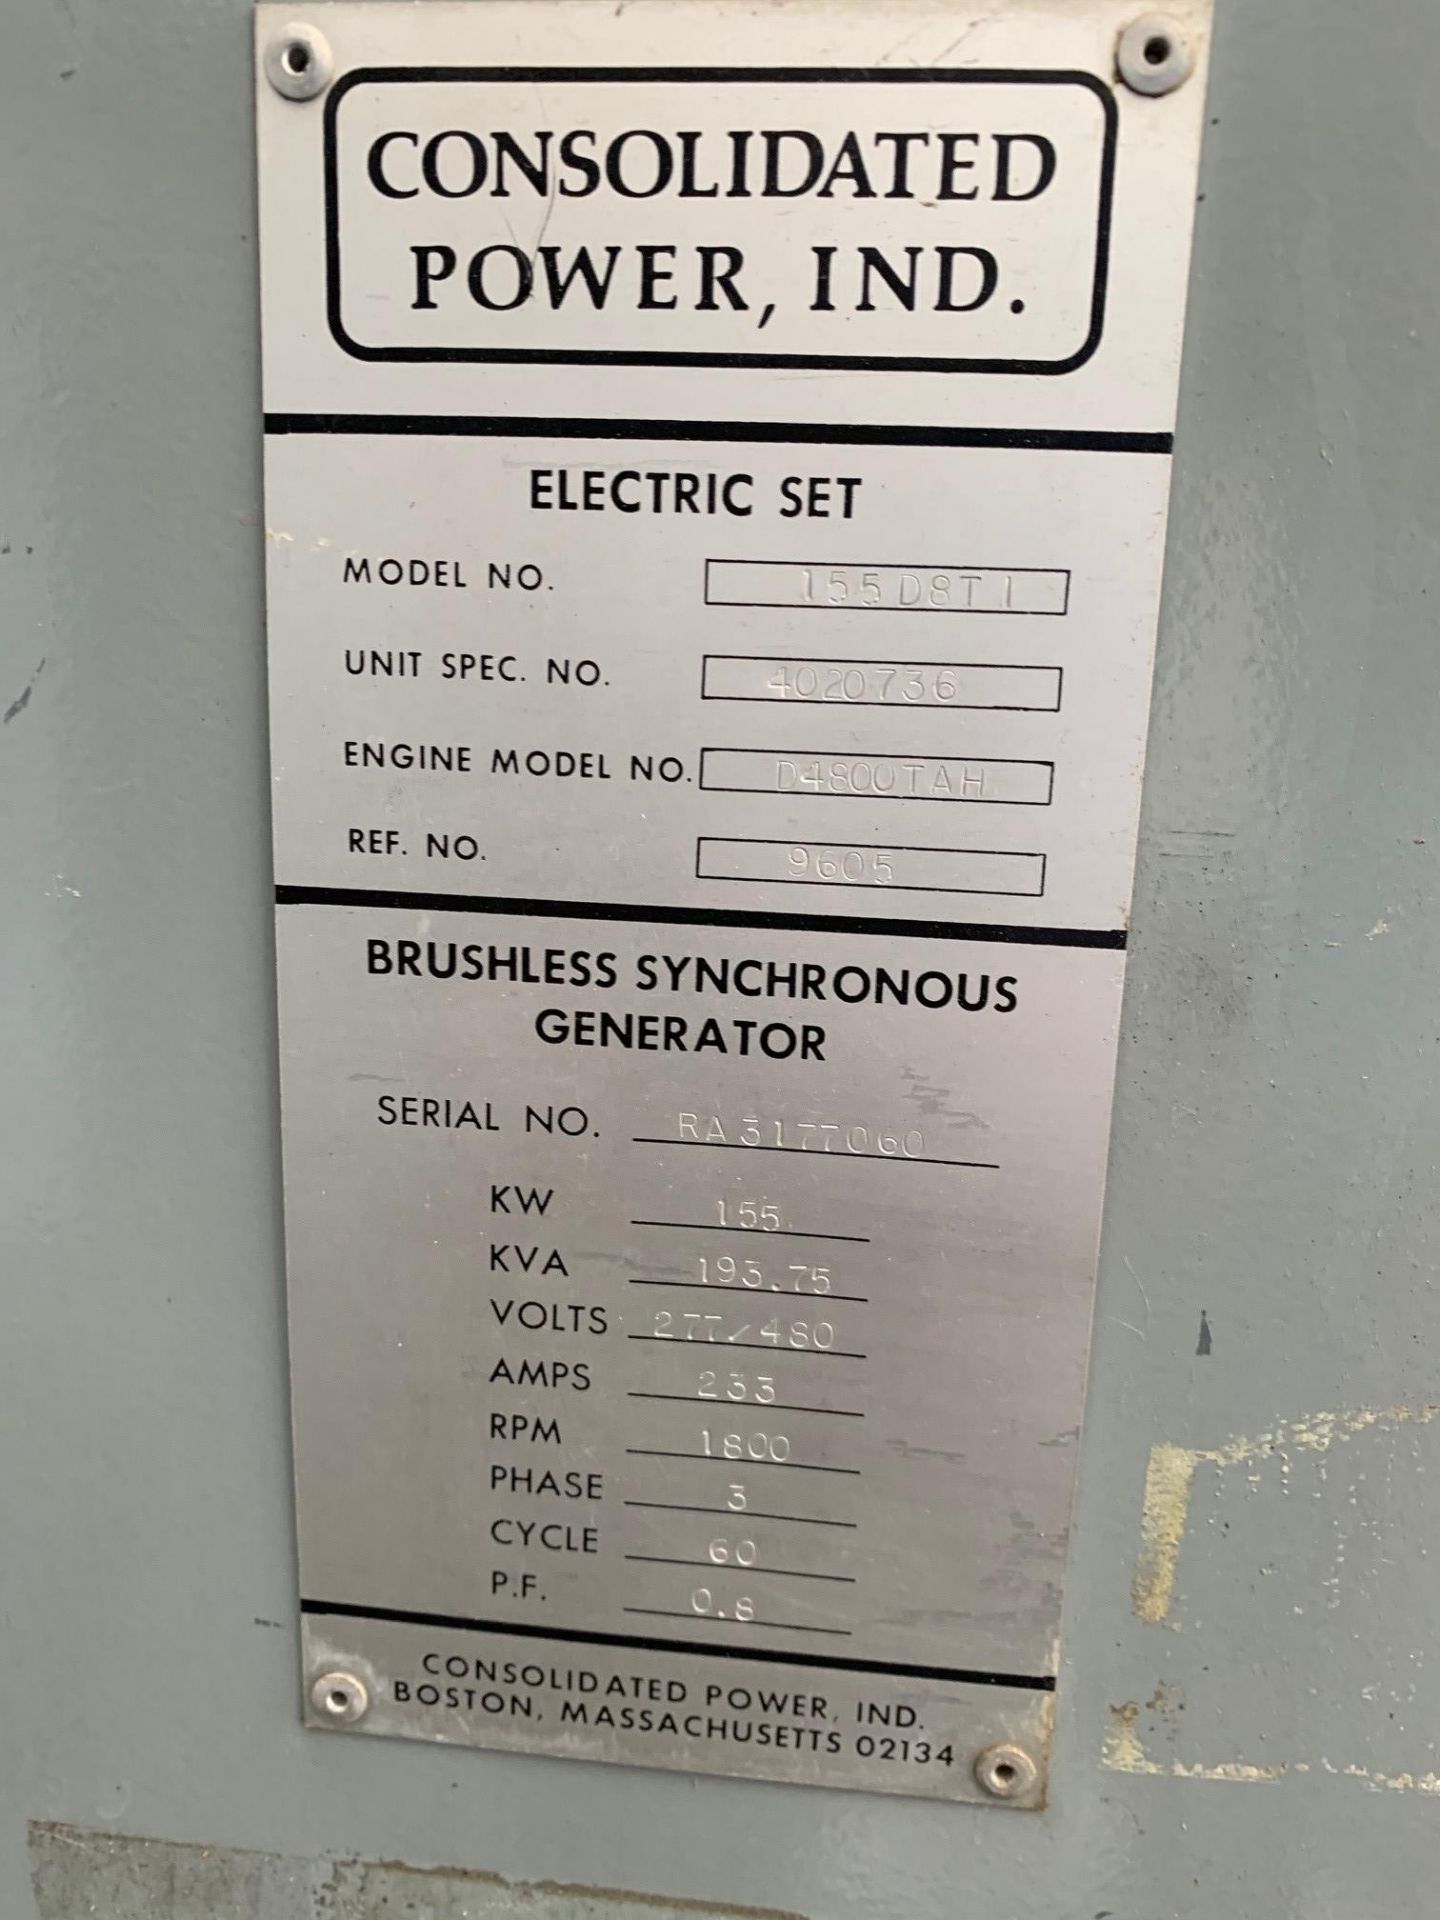 Consolidated Power Brushless Synchronous Generator, Model #155D8T1, Serial #RA3177060 - Image 2 of 3